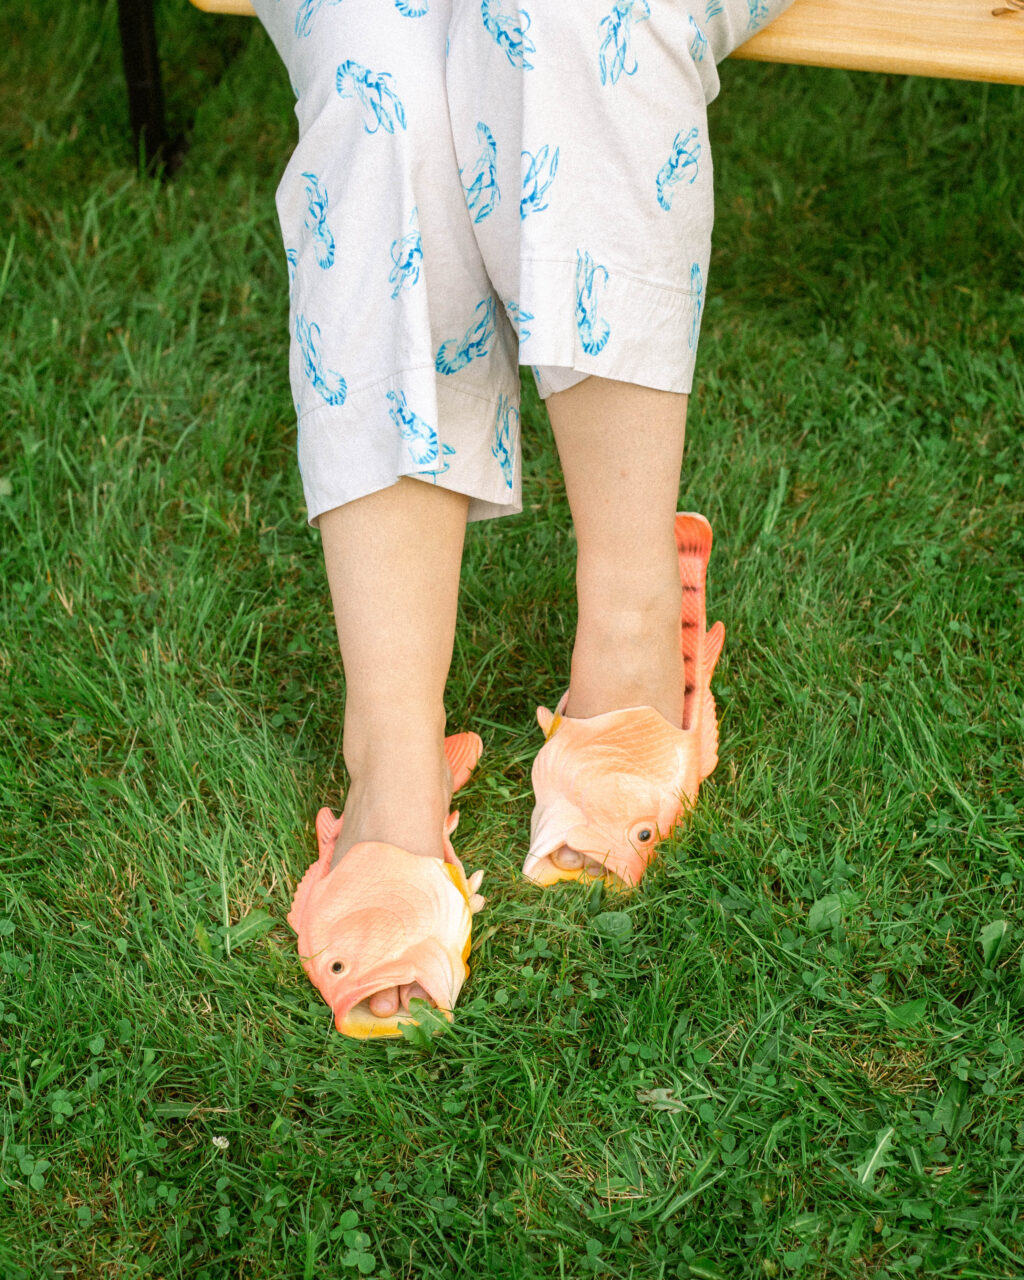 a person shows their shoes with metallic orange fish sandles under the grass